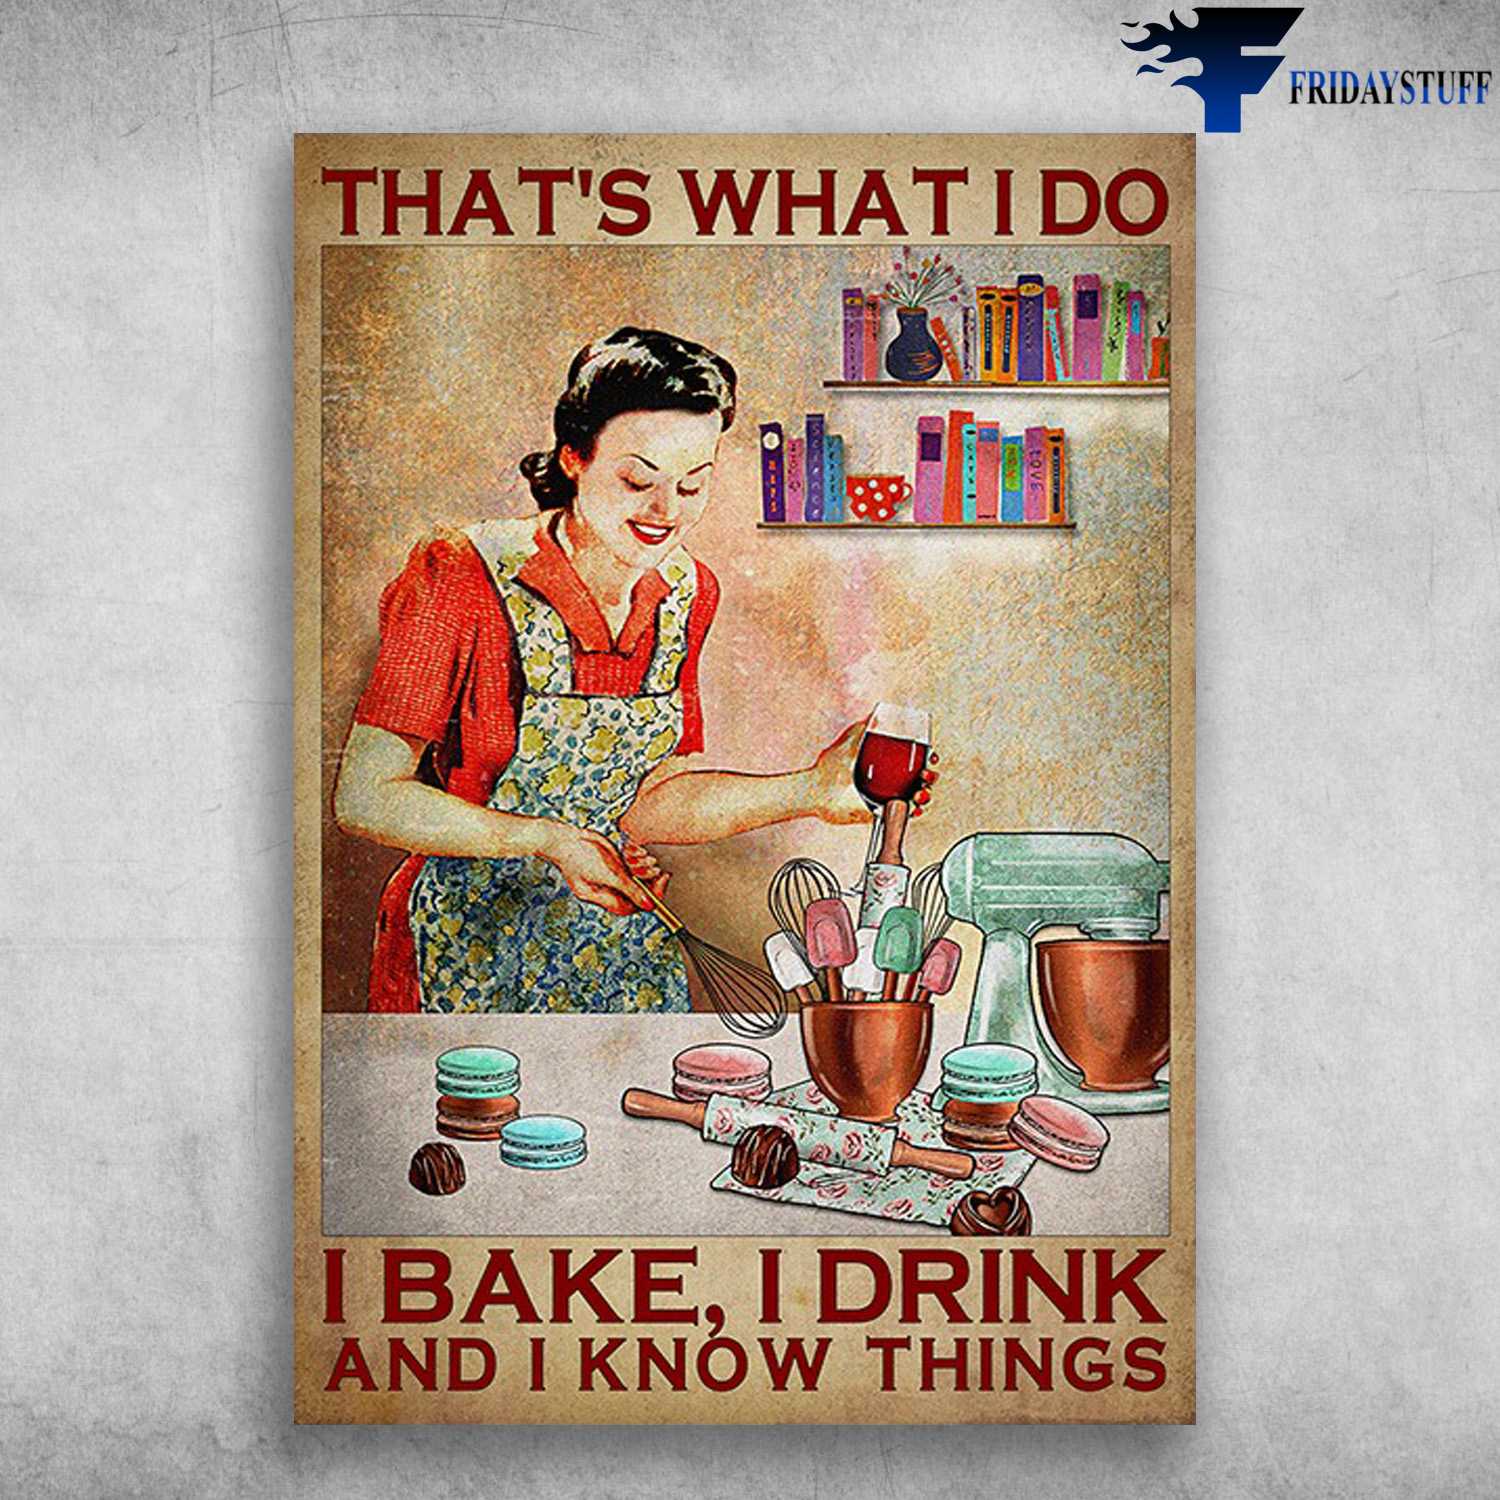 Baking Girl, Cake And Wine - That's What I Do, I Bake, I Drink, And I Know Things